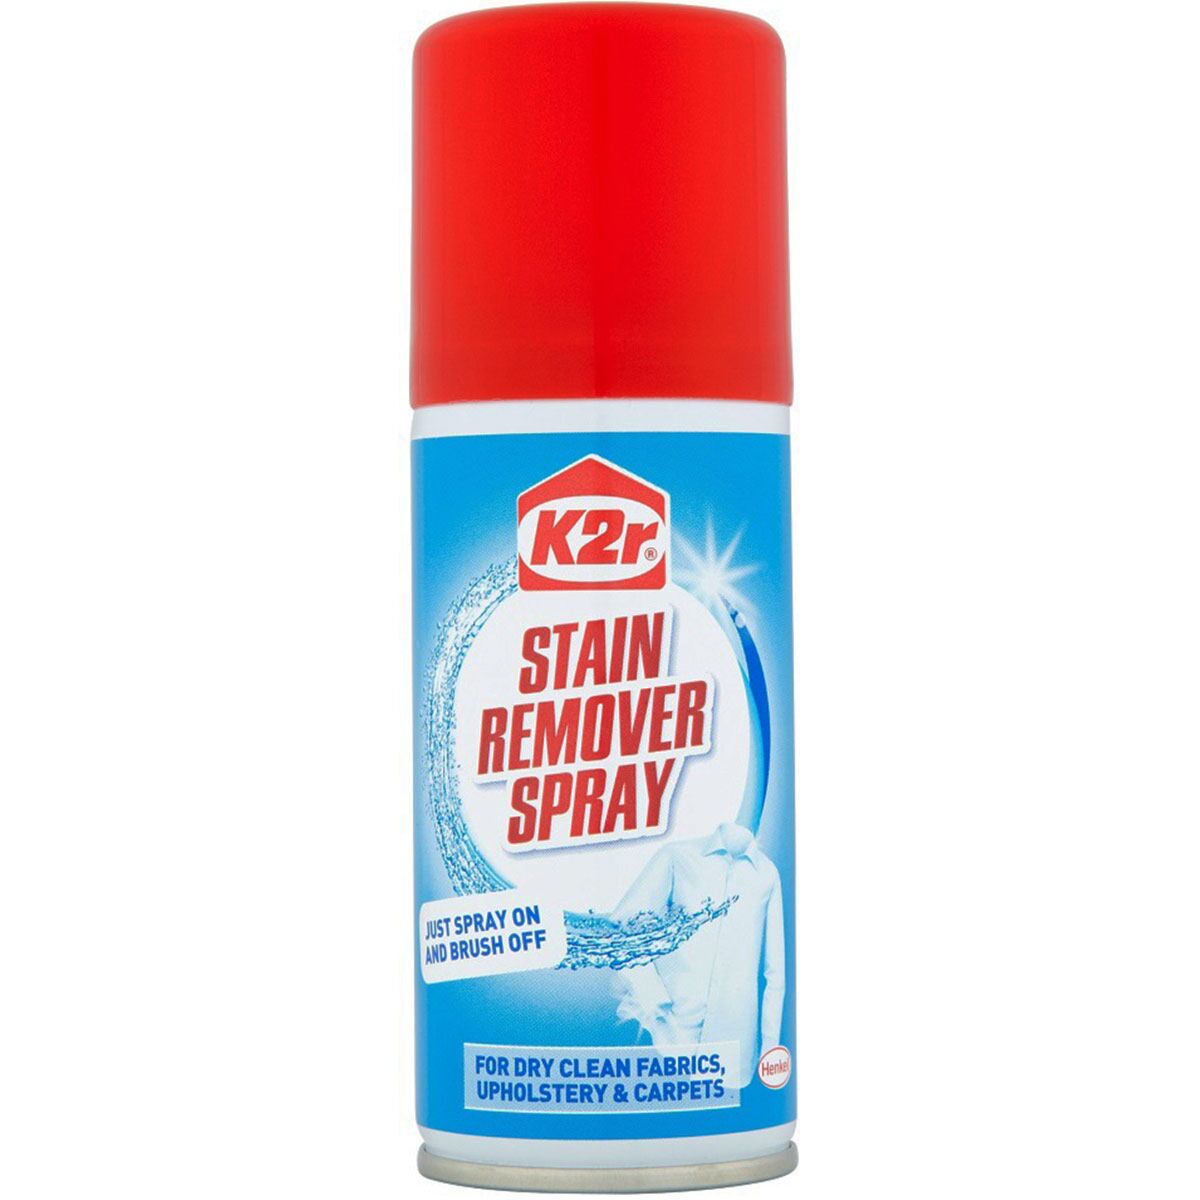 K2R Stain Remover Spray | Your Local DIY Shop